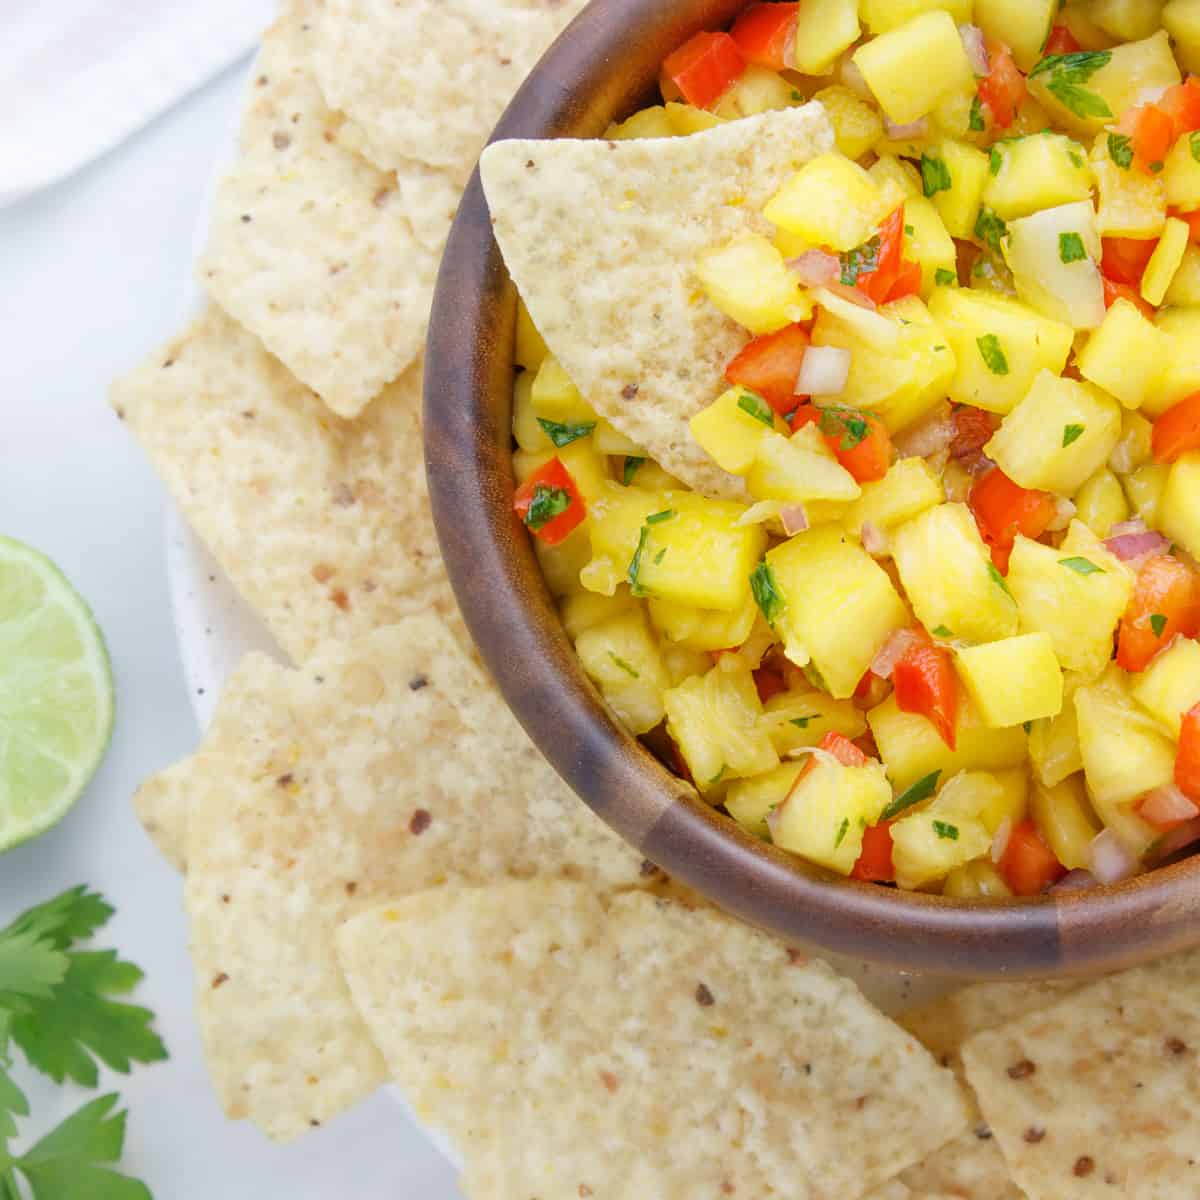 Pineapple Mango Habanero Salsa in a wooden bowl on top of a white plate with tortilla chips. Salsa shows yellow mangos and pineapples, with red bits of bell pepper and small bits of red onion and cilantro. The left of the photo shows the inside of half a lime with green cilantro next to it.